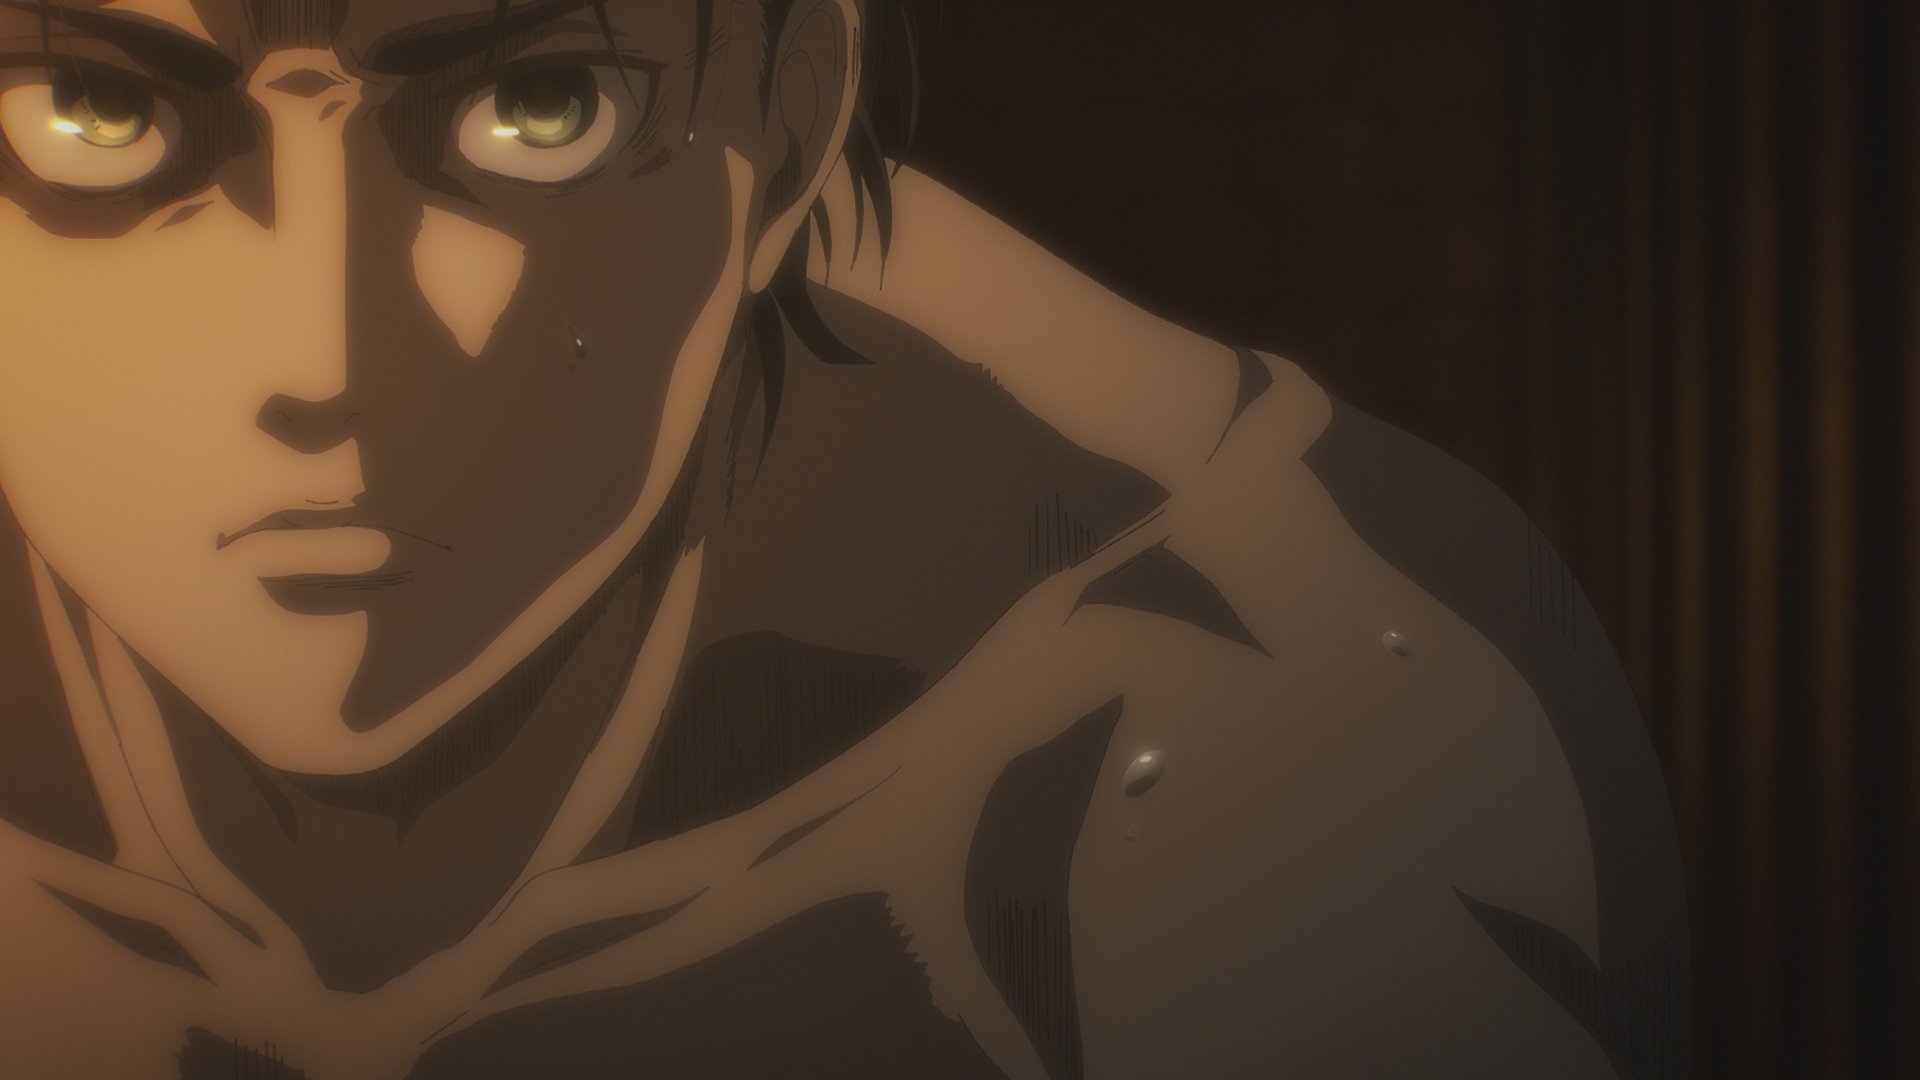 &039Attack on Titan&039: Does Eren Jaeger Become the Villain in the Manga?